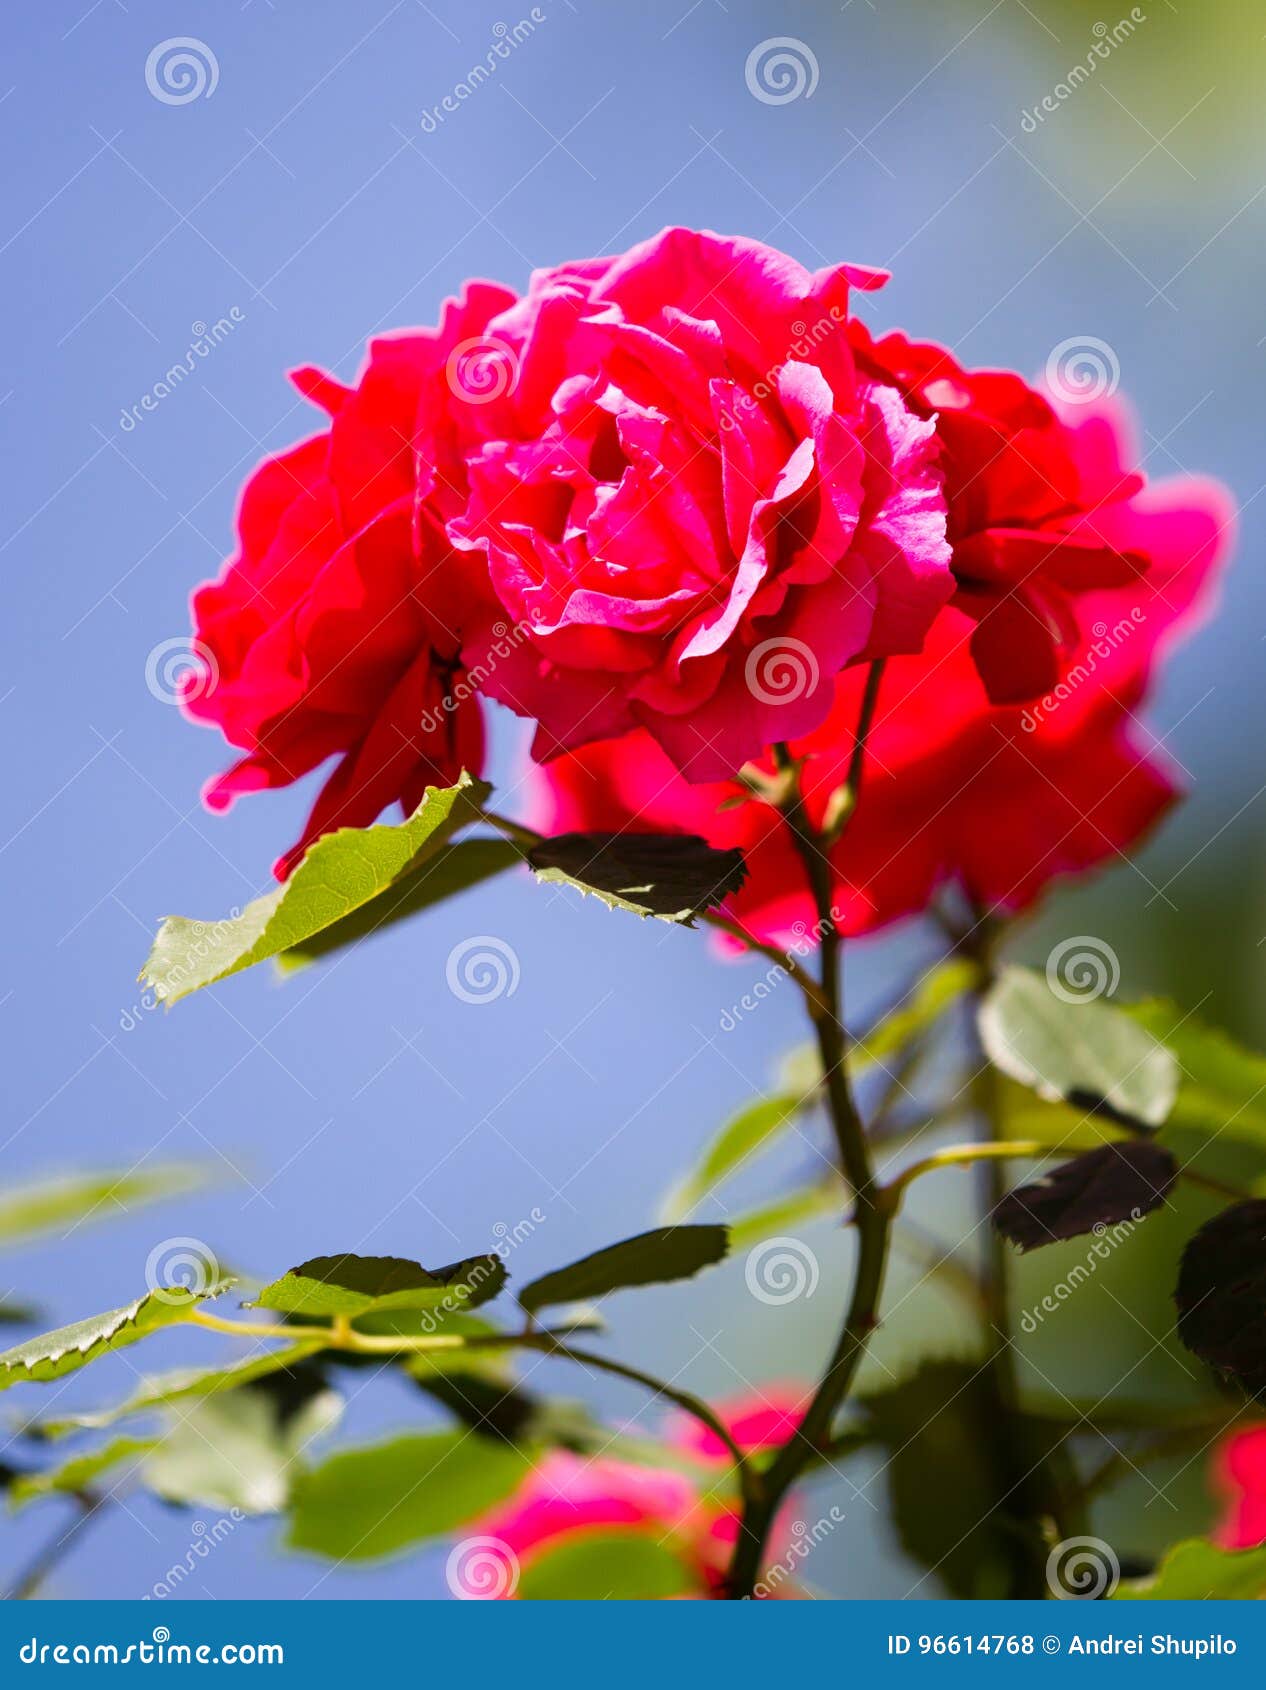 Red Rose In A Park In The Nature Stock Photo Image Of Deep Green